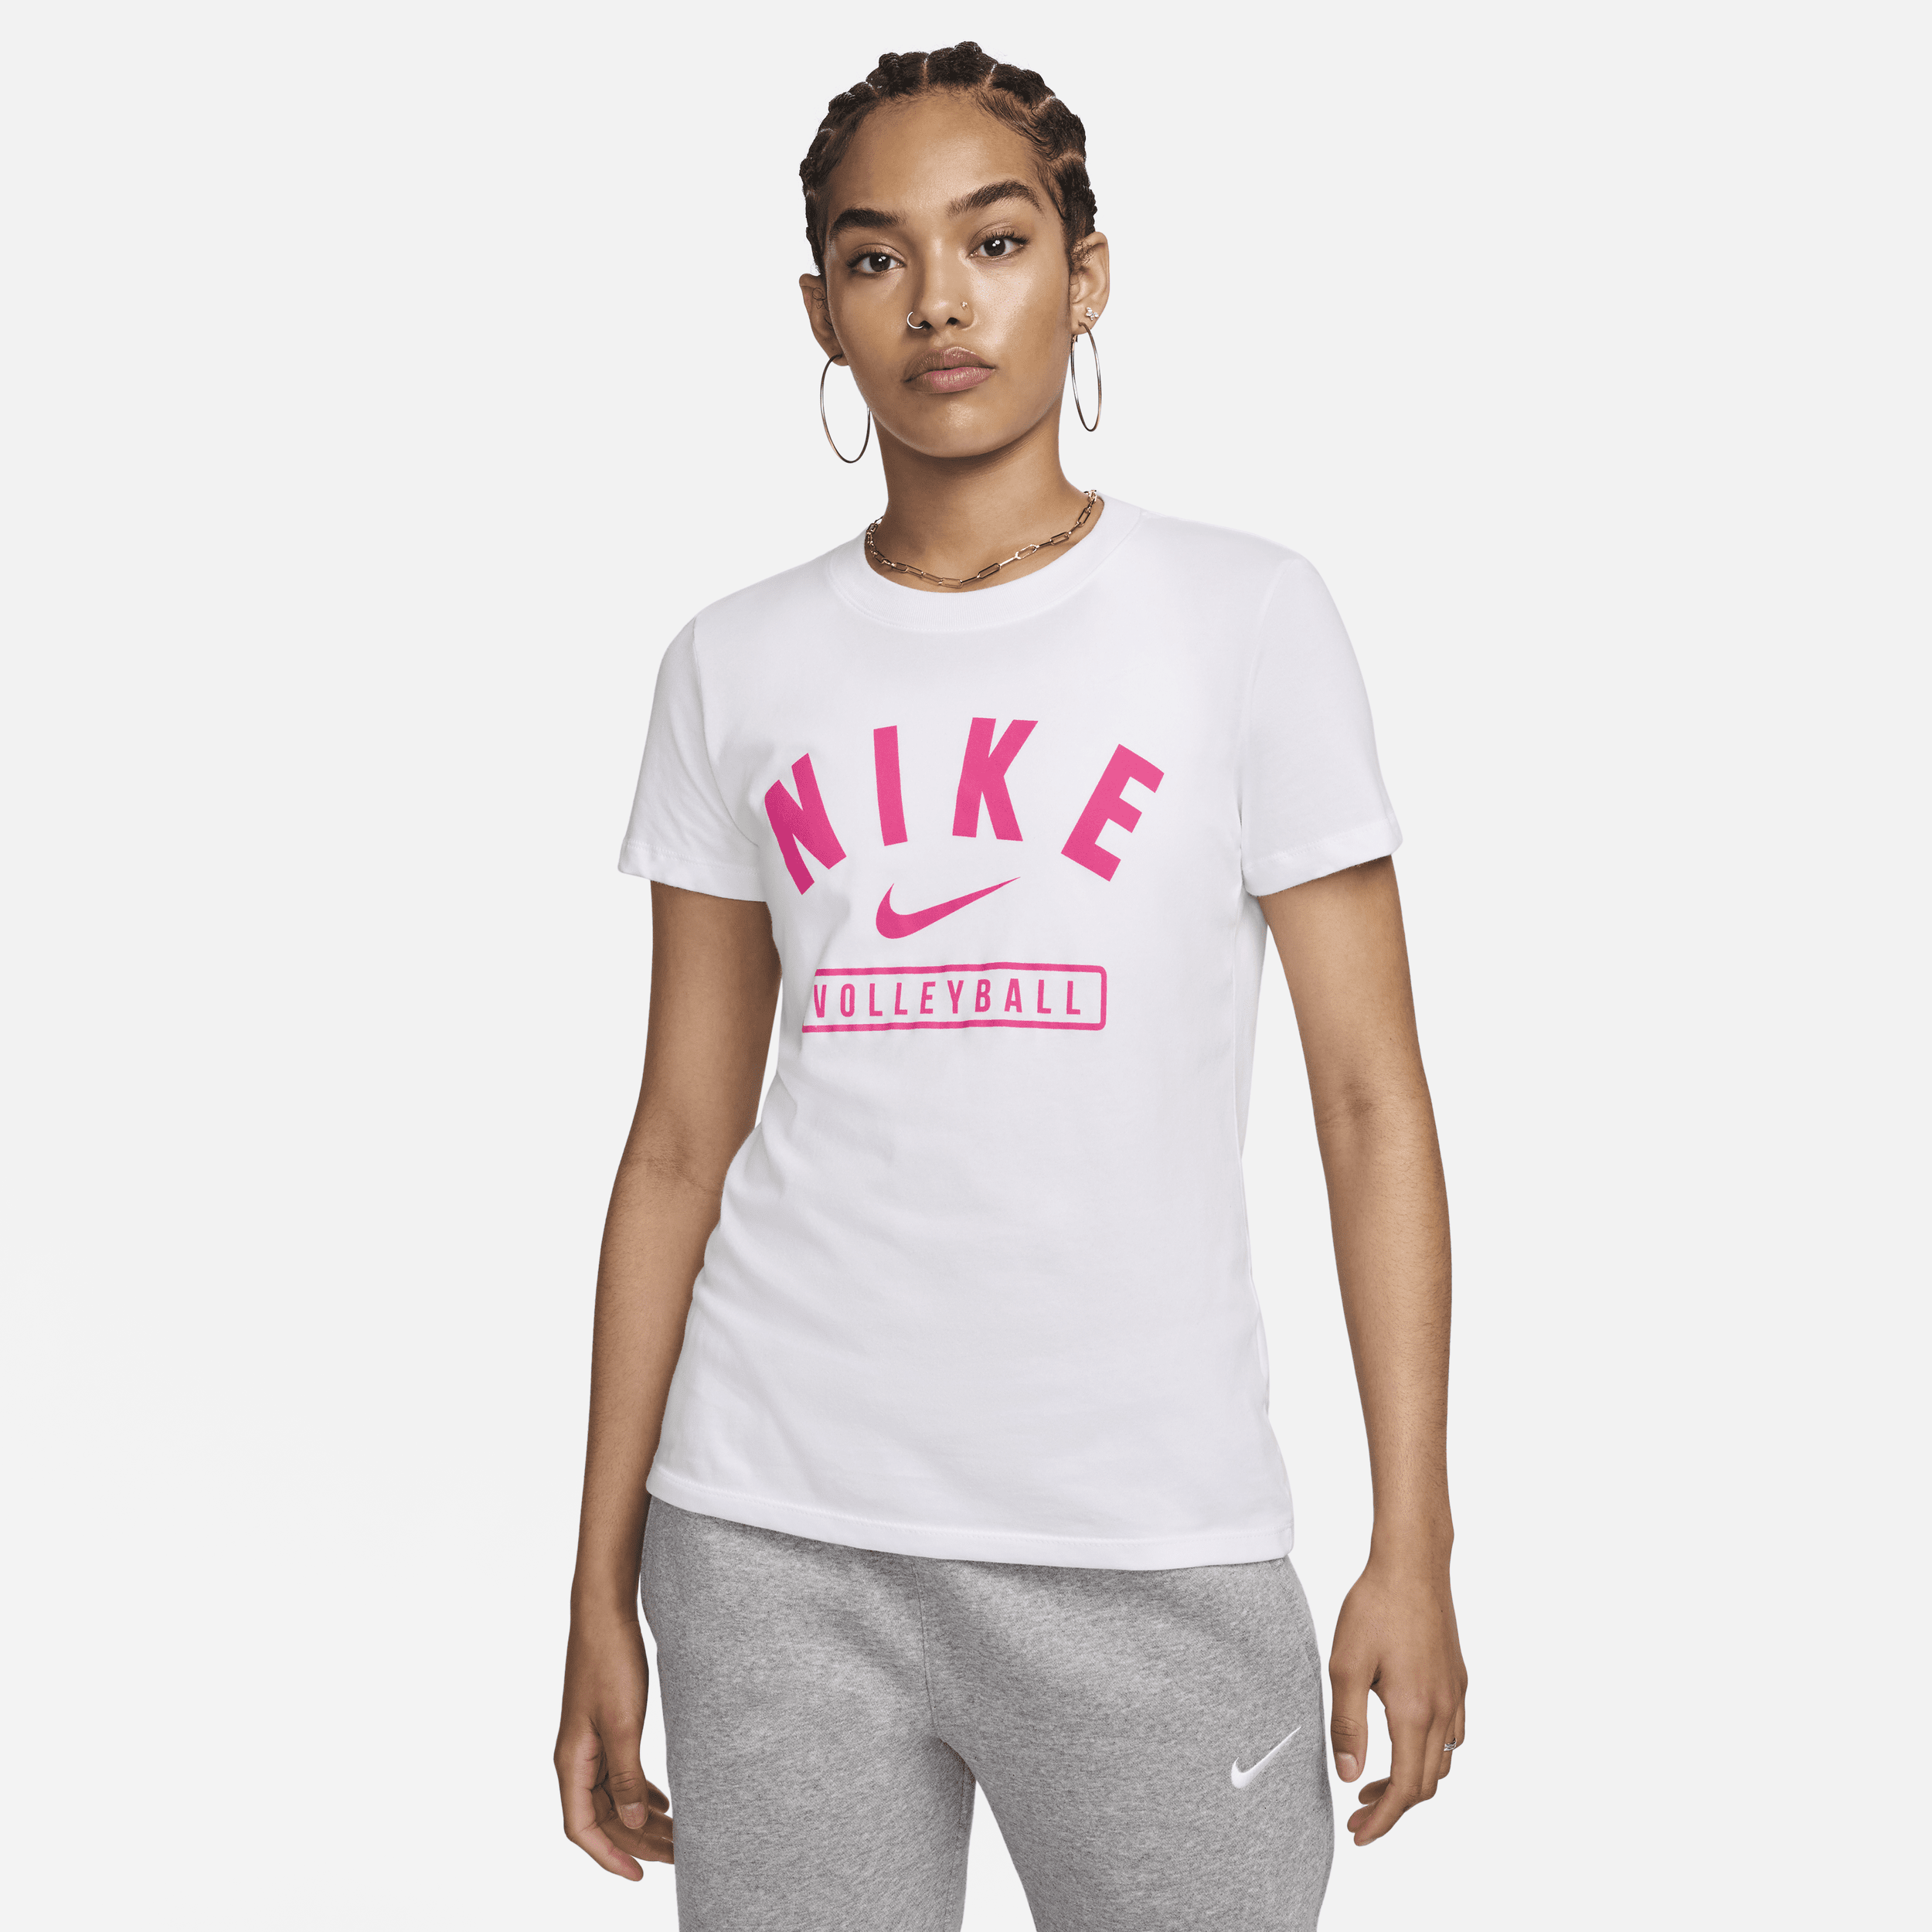 Nike Women's Volleyball T-shirt In White